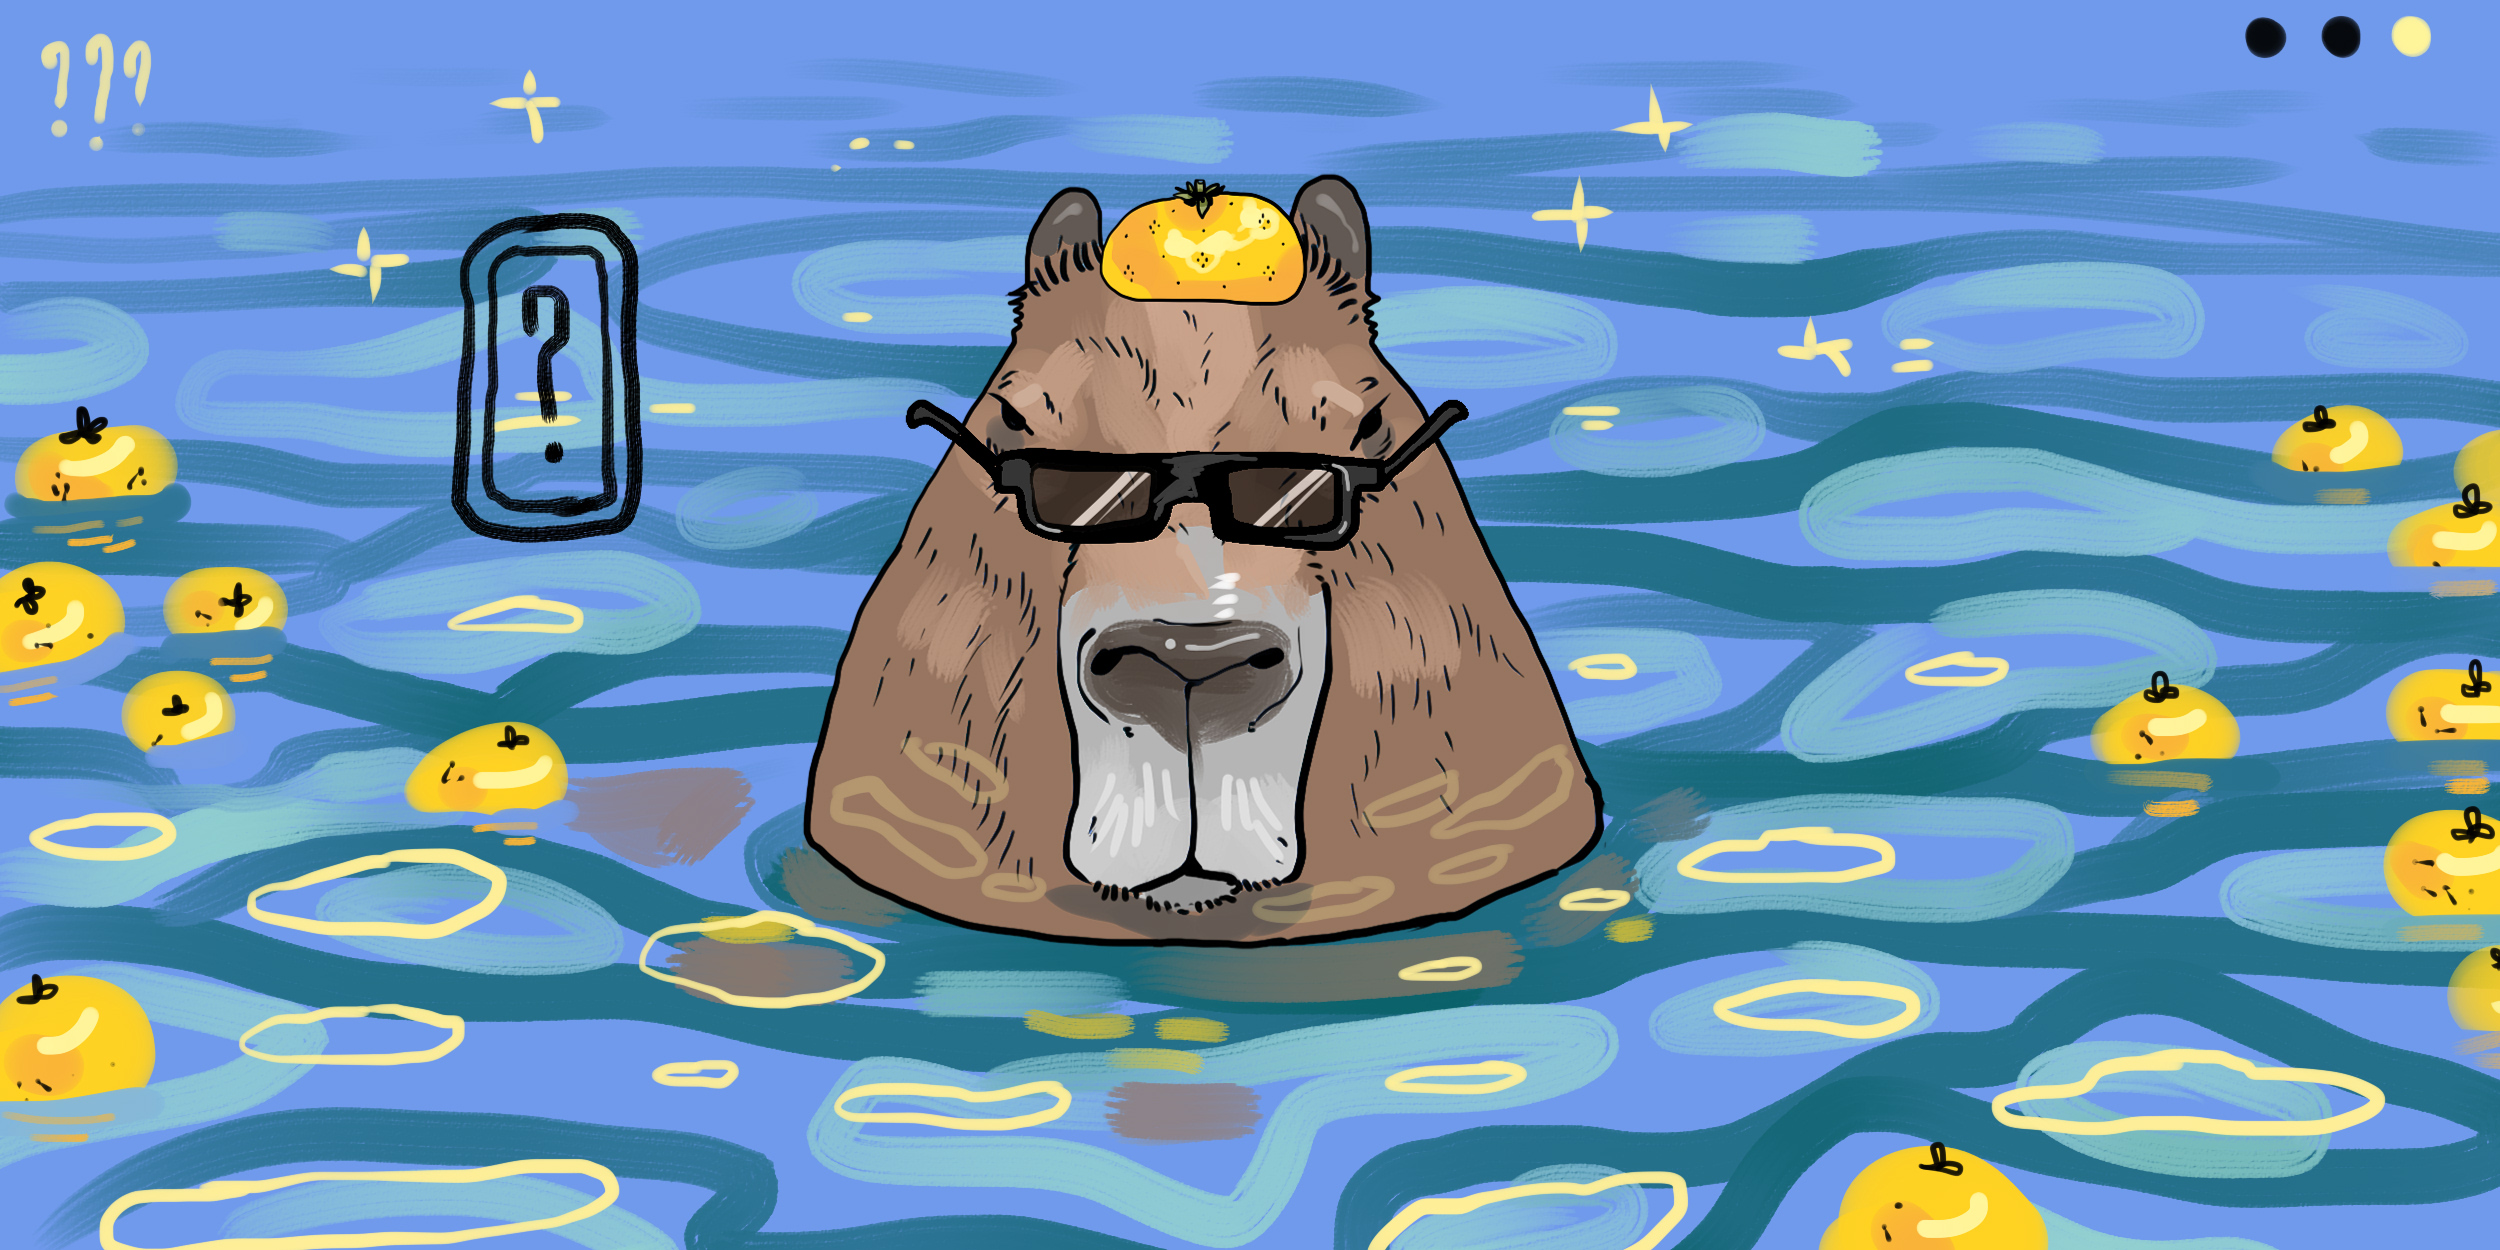 The one piece is real Capybara